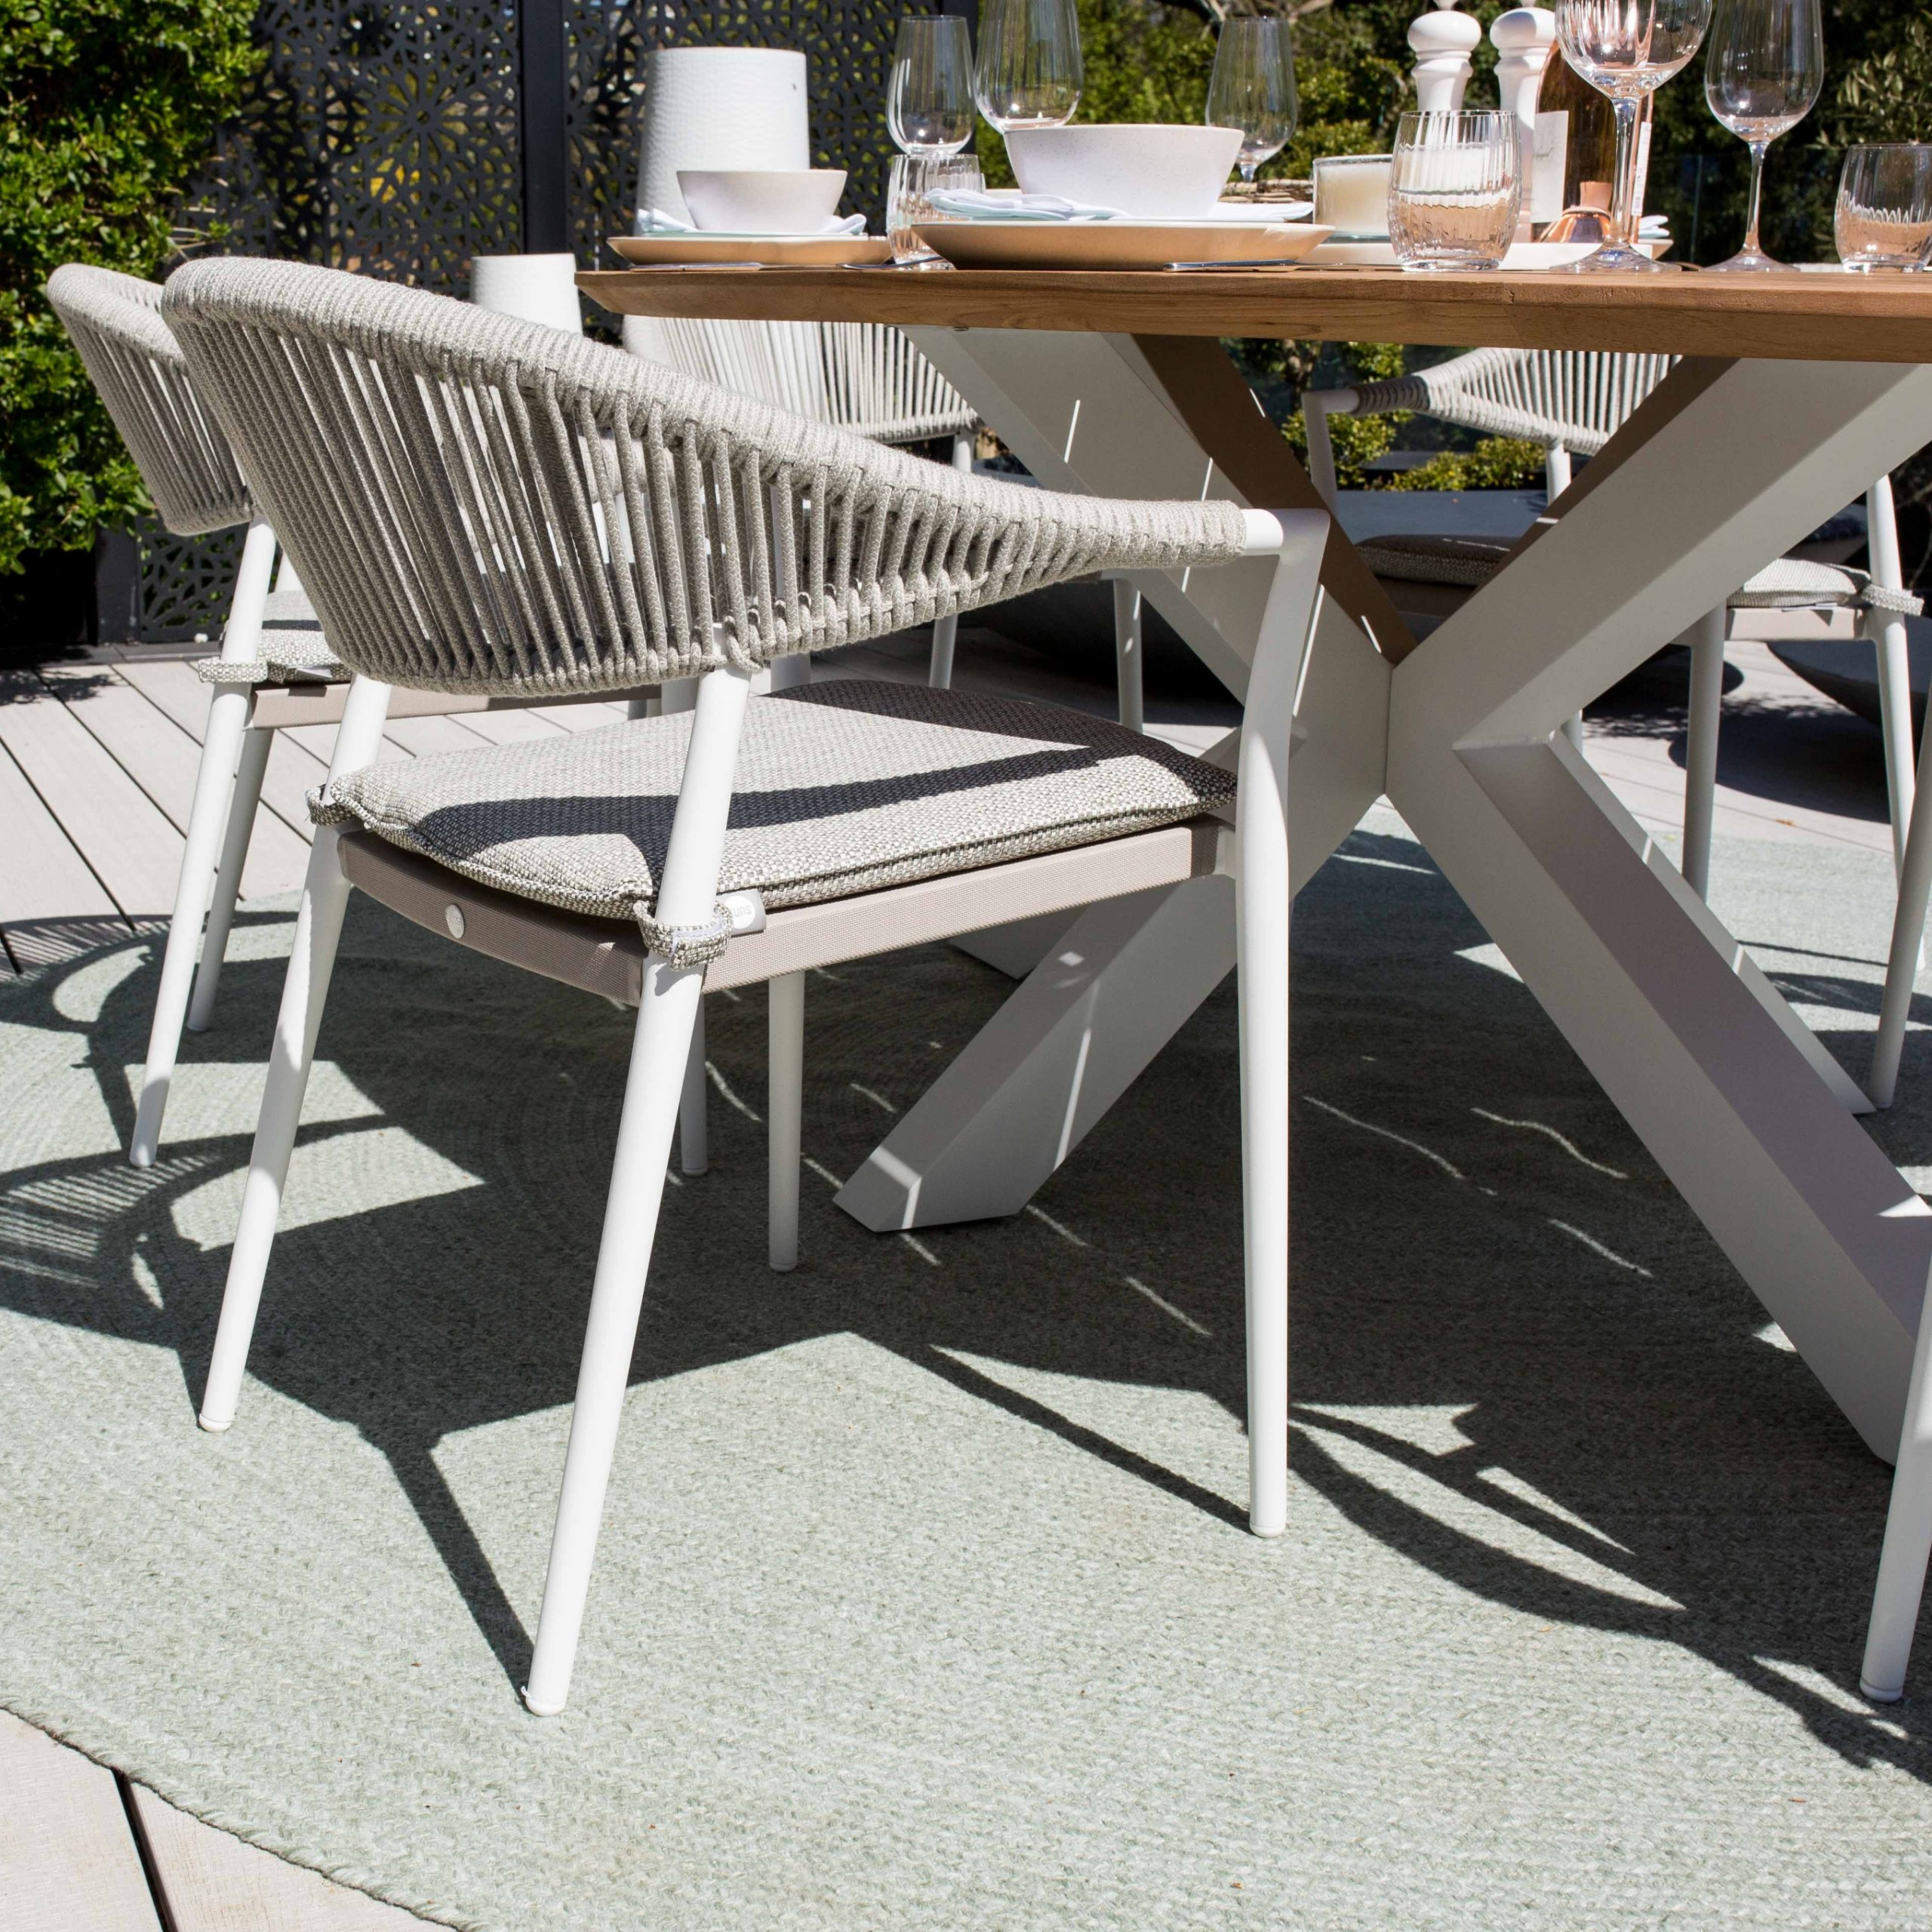 Outdoor Lifestyle Suns Chairs Table | Dining & Matera Madre &